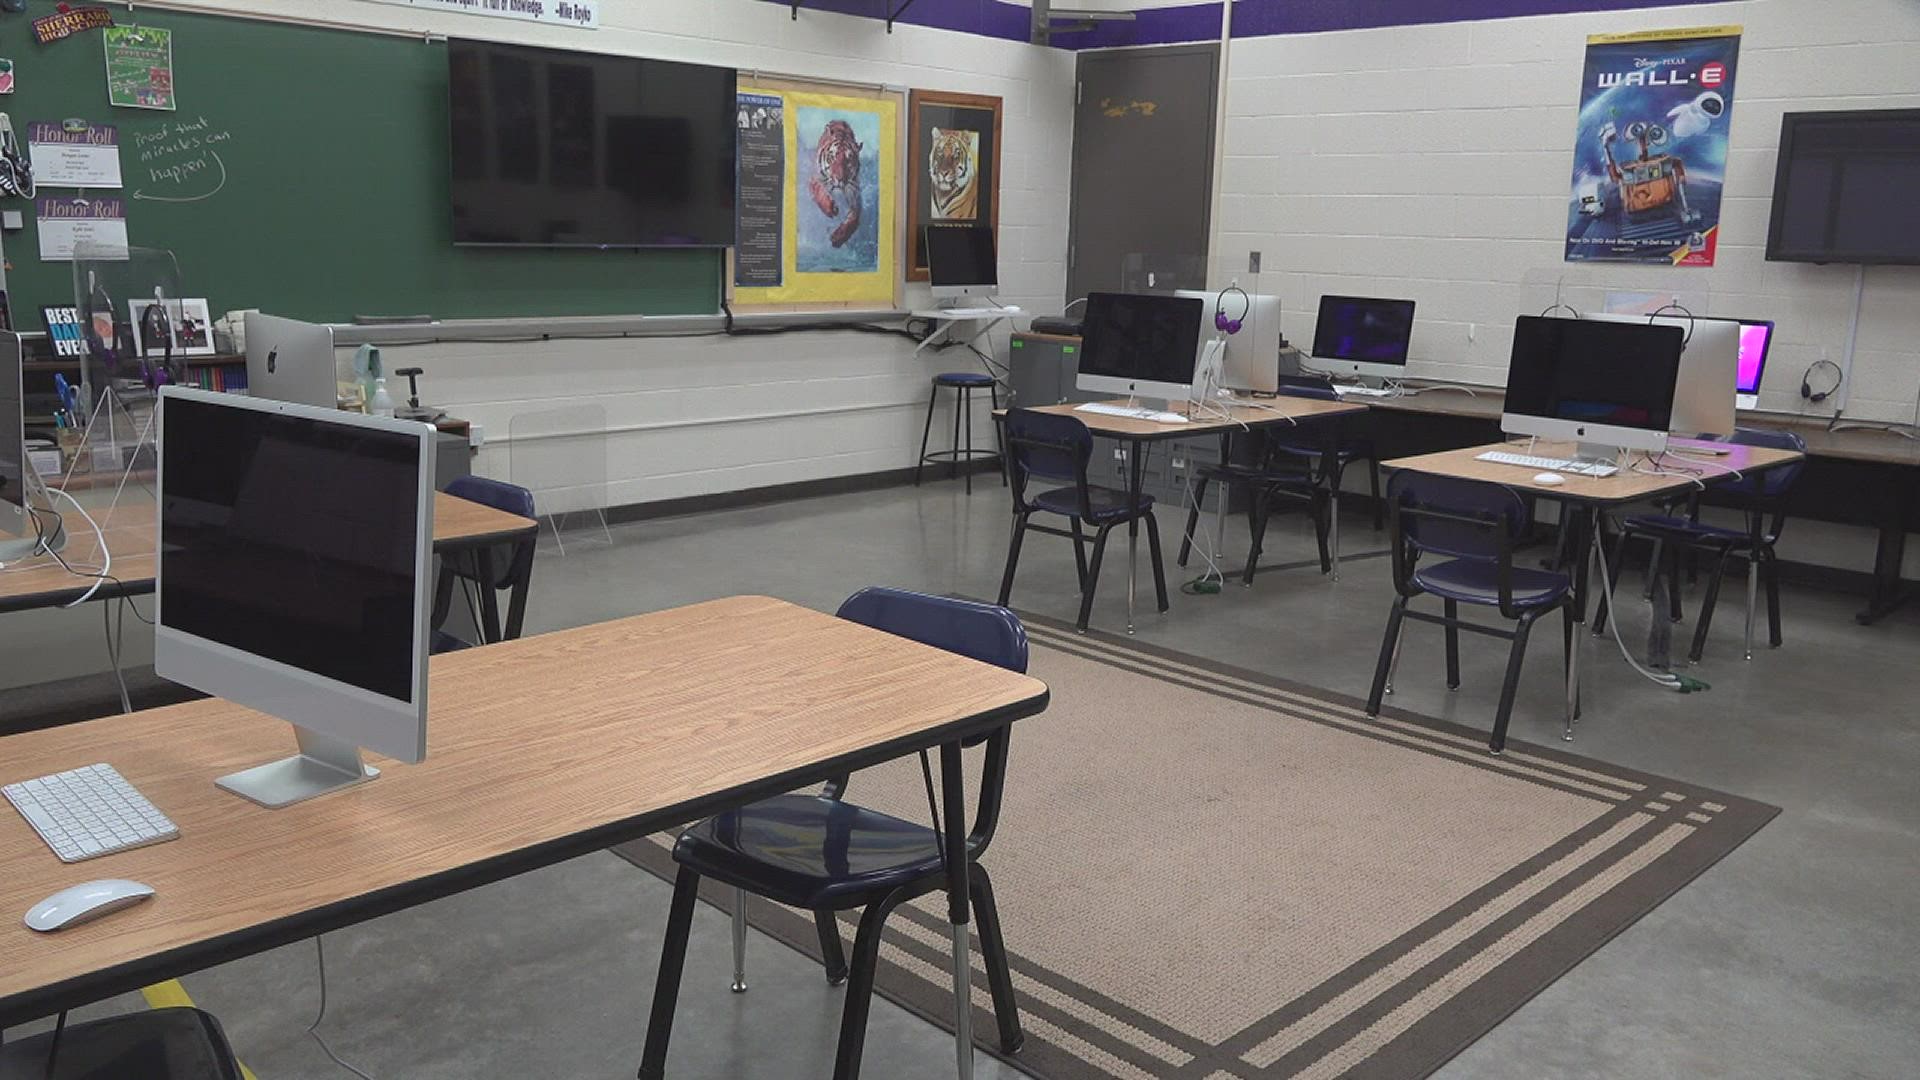 Sherrard High School's principal said the district noticed a need for the school during the height of the COVID-19 pandemic.